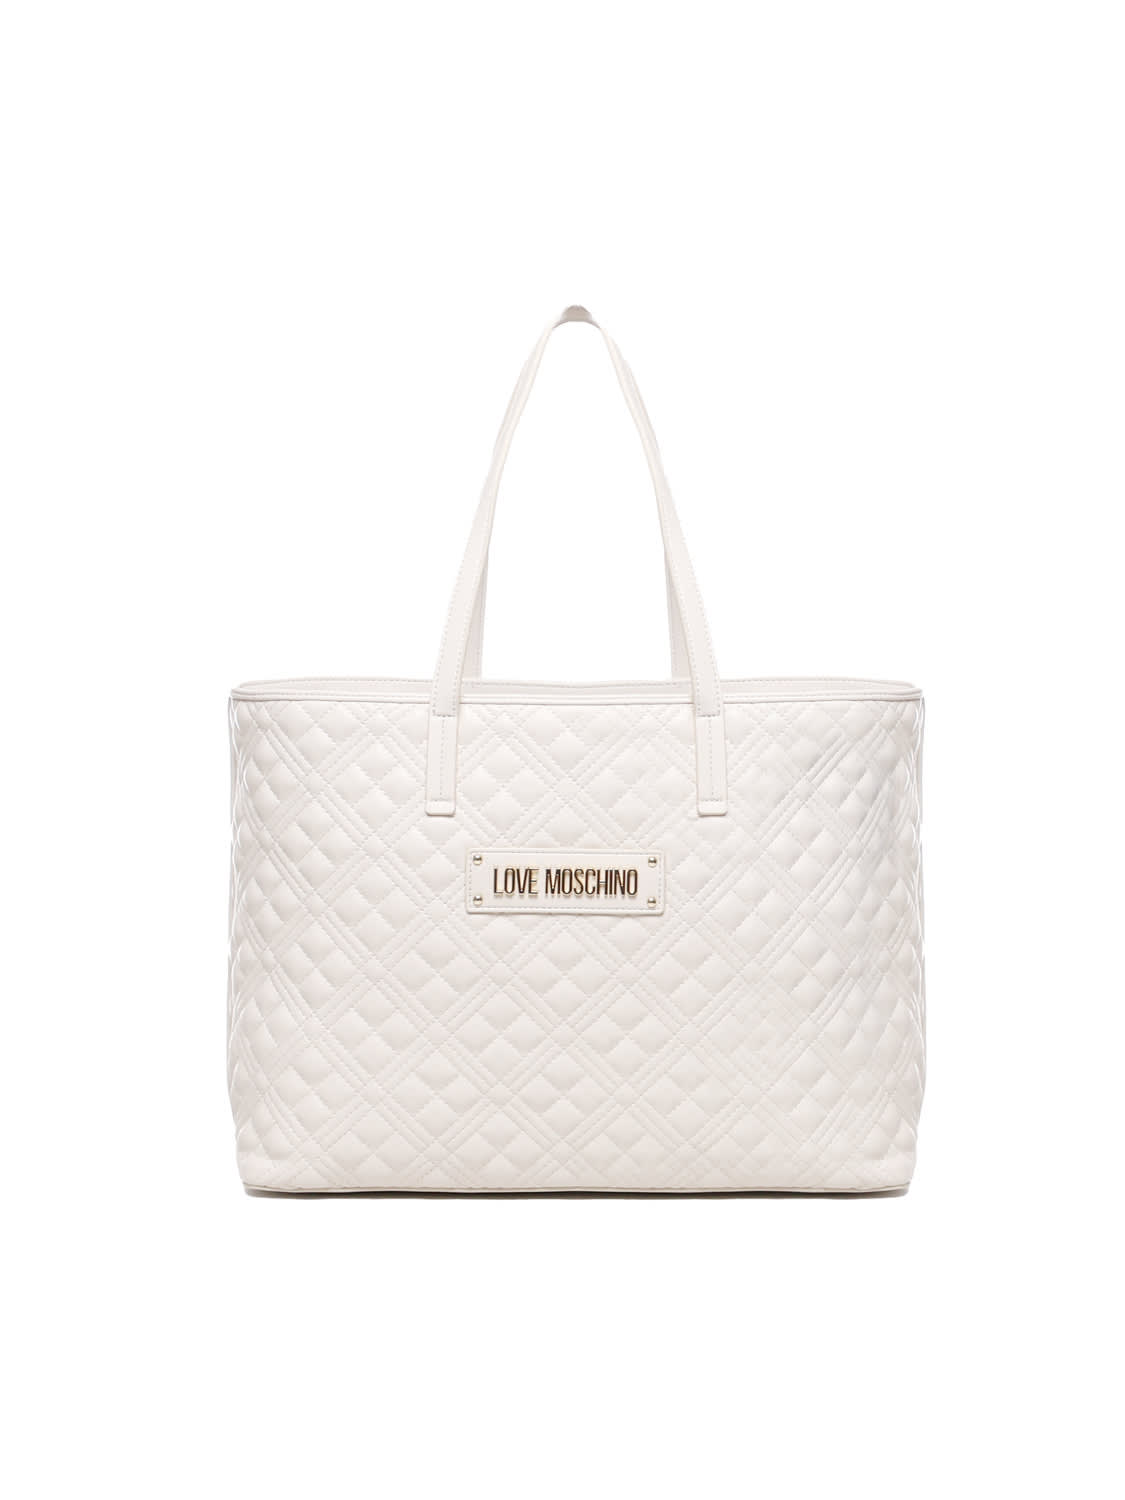 Love Moschino Quilted Shopping Bag